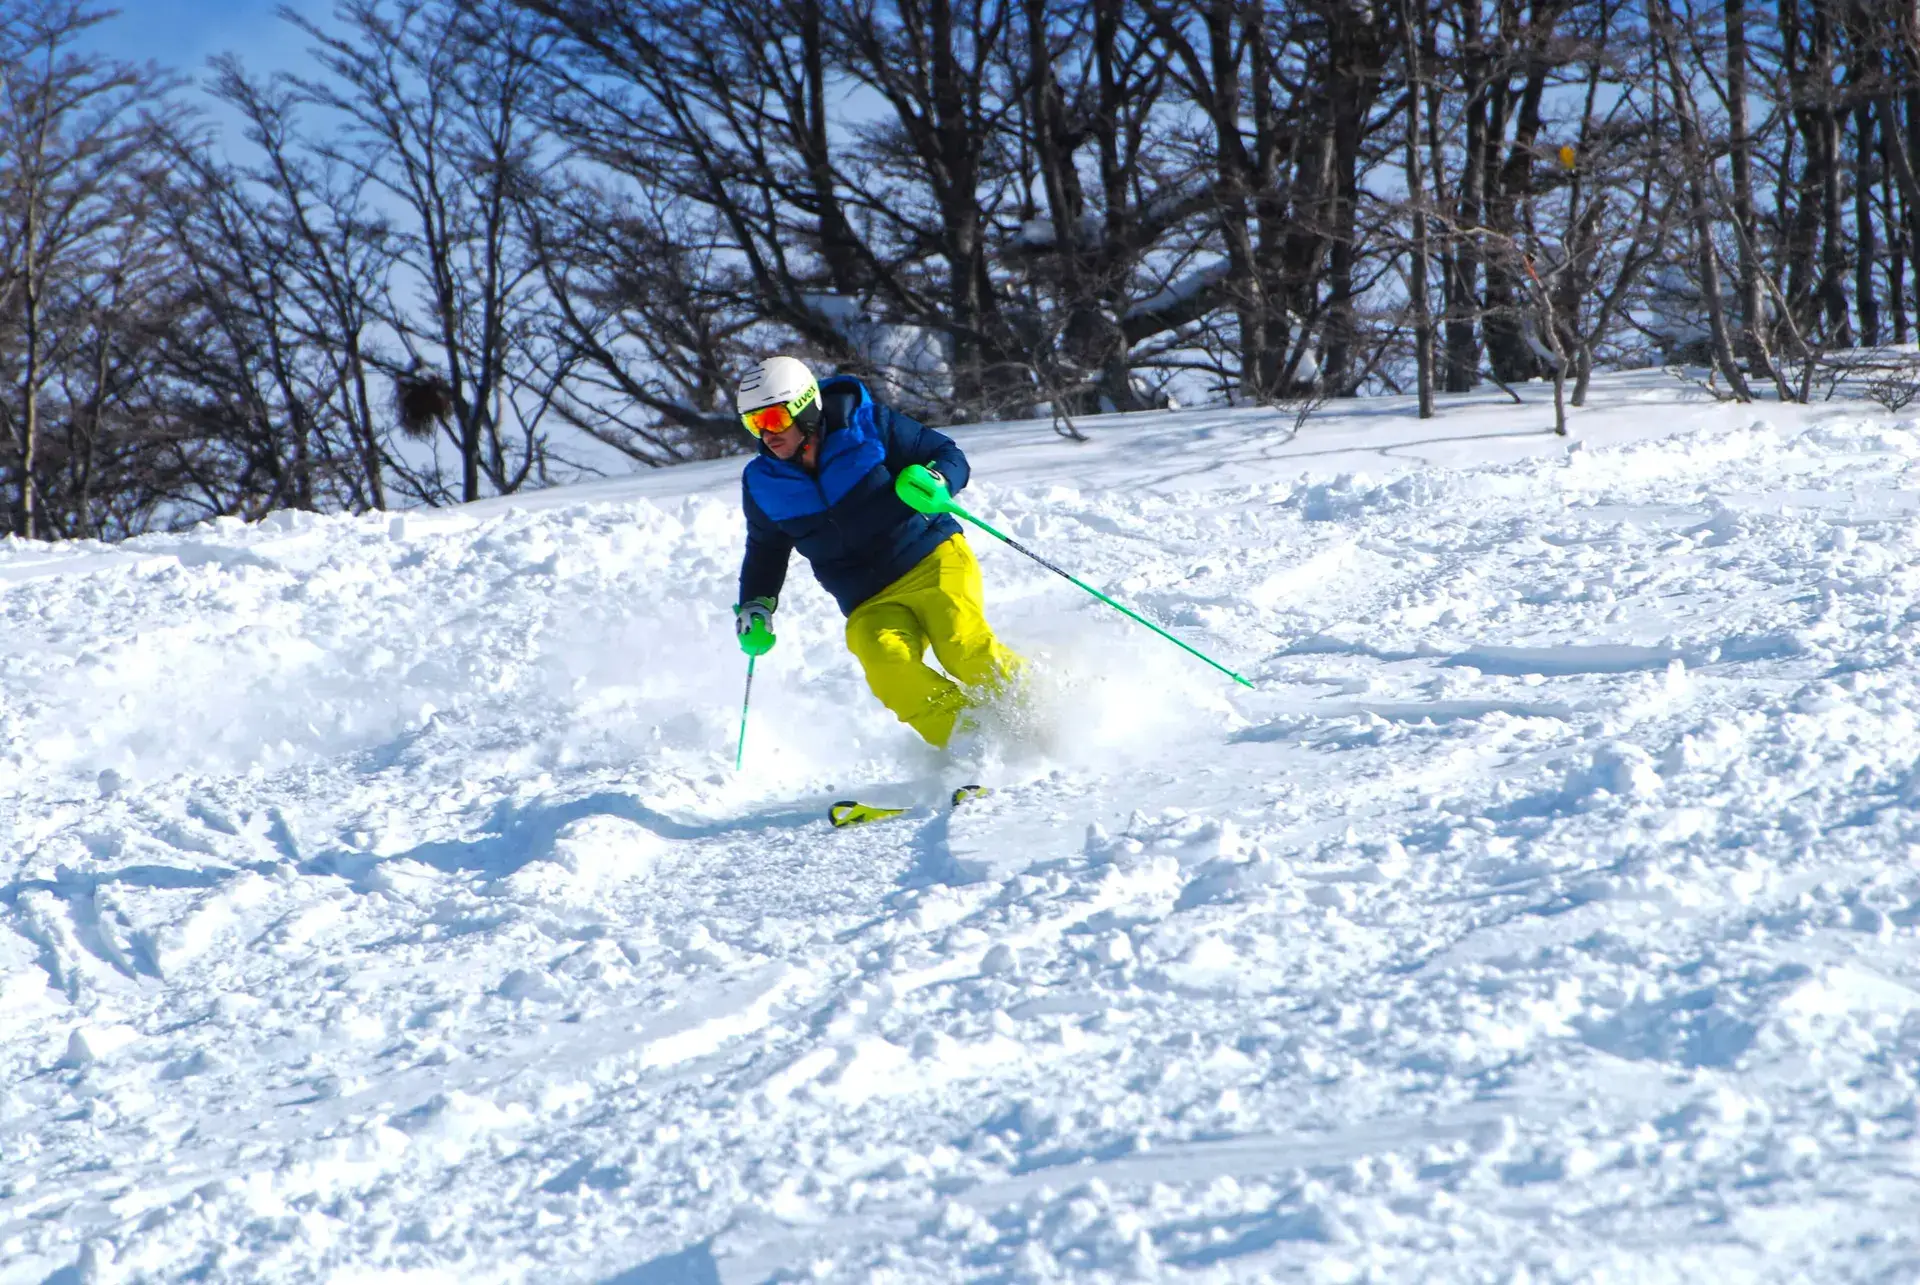 Skier in Powder skiing with Slalom Skis Tips Up